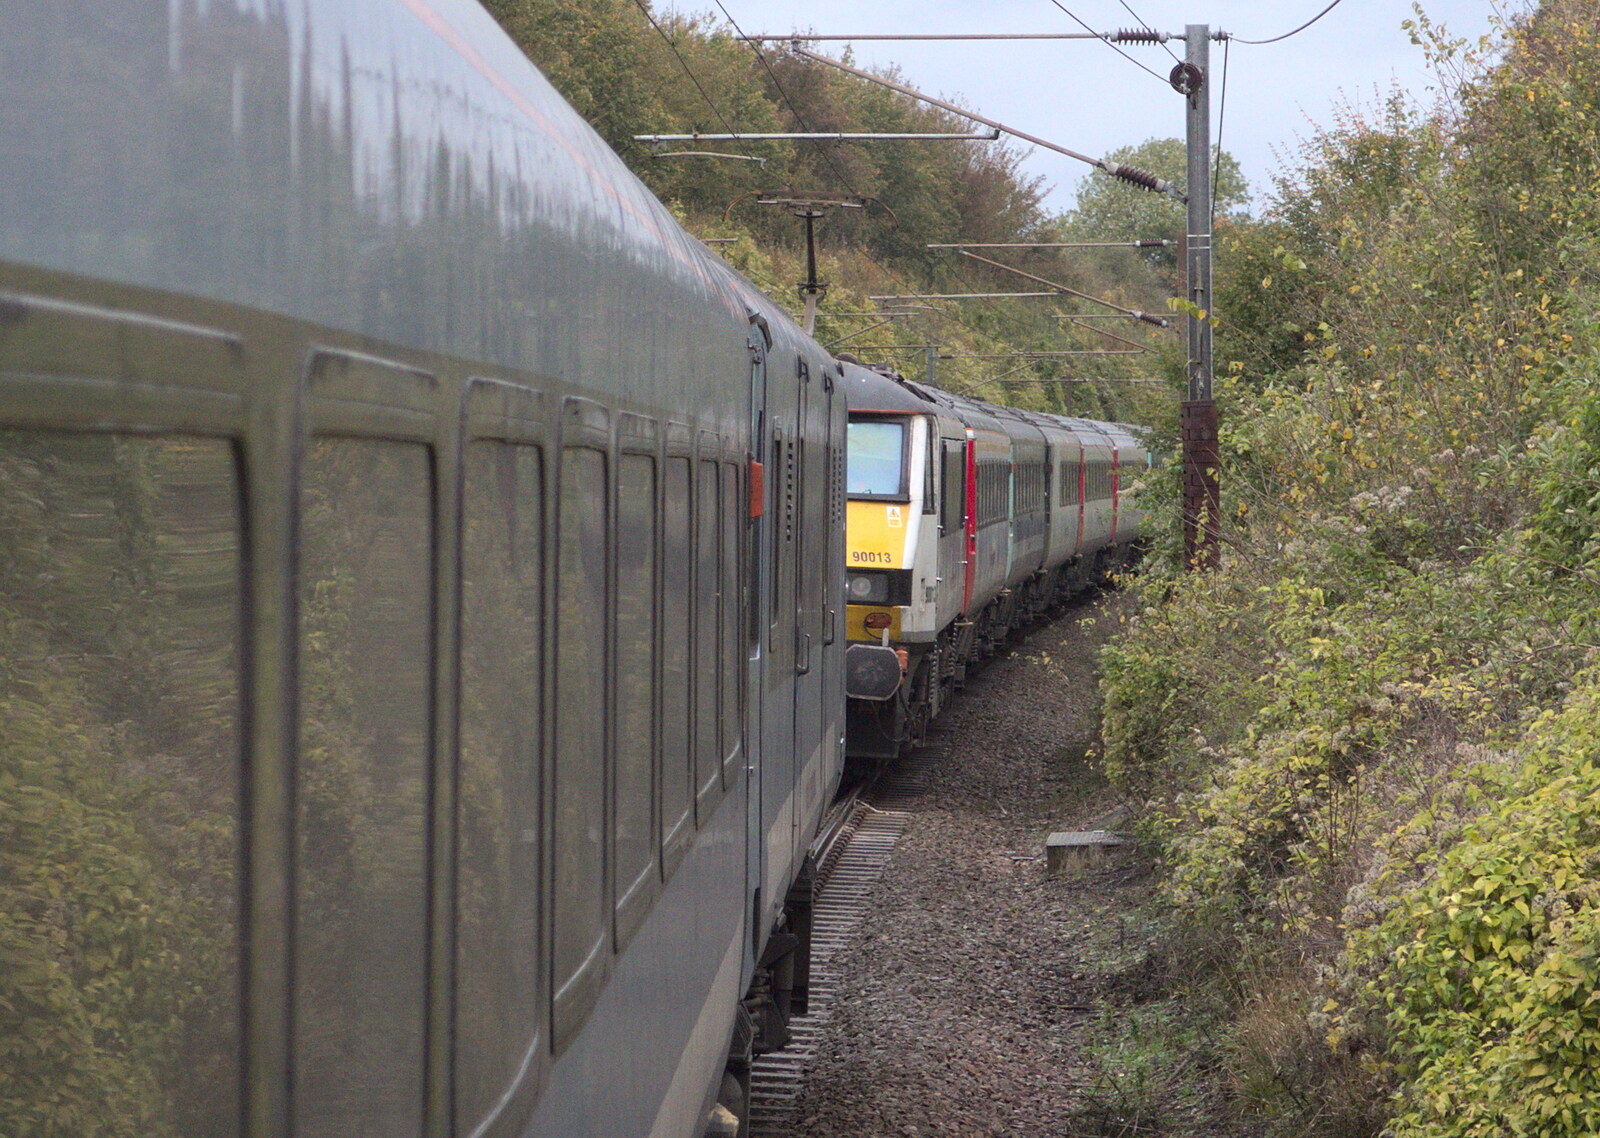 The delayed 08:47 rolls up to push us along from (Very) Long Train (Not) Running, Stowmarket, Suffolk - 21st October 2014